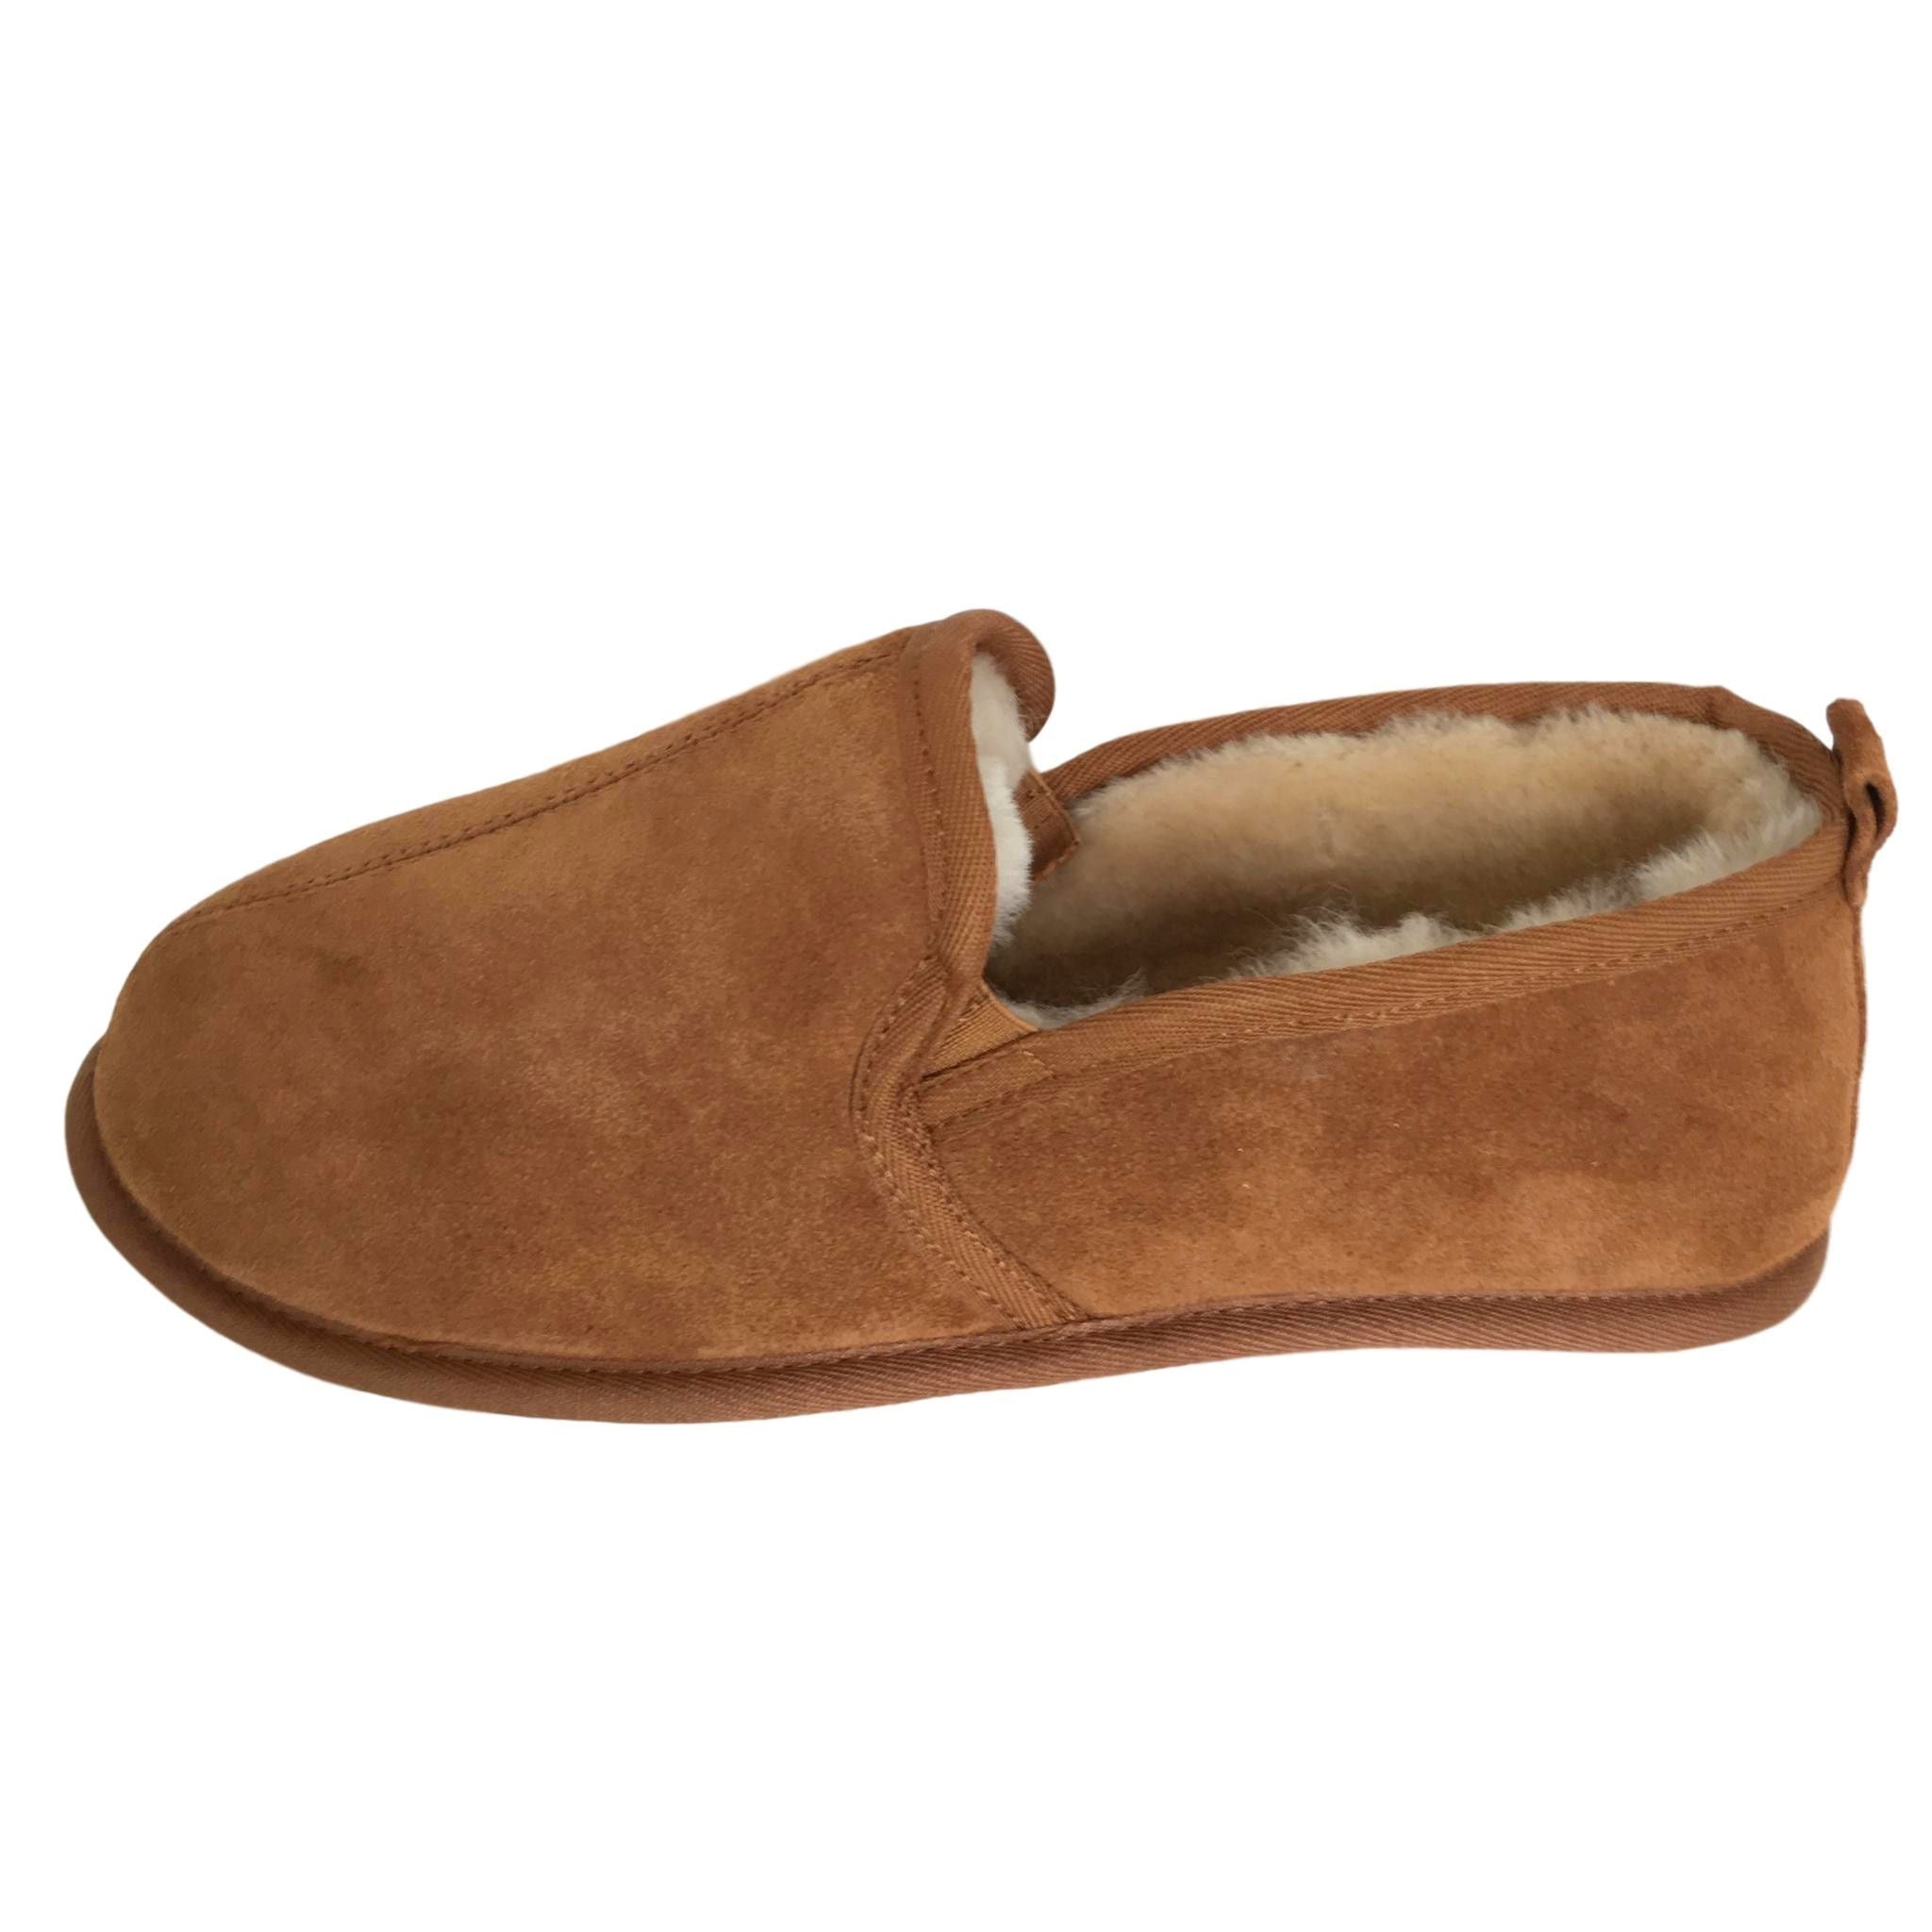 Deluxe Mens 'Liam' Sheepskin Slippers with Soft Sole - Chestnut